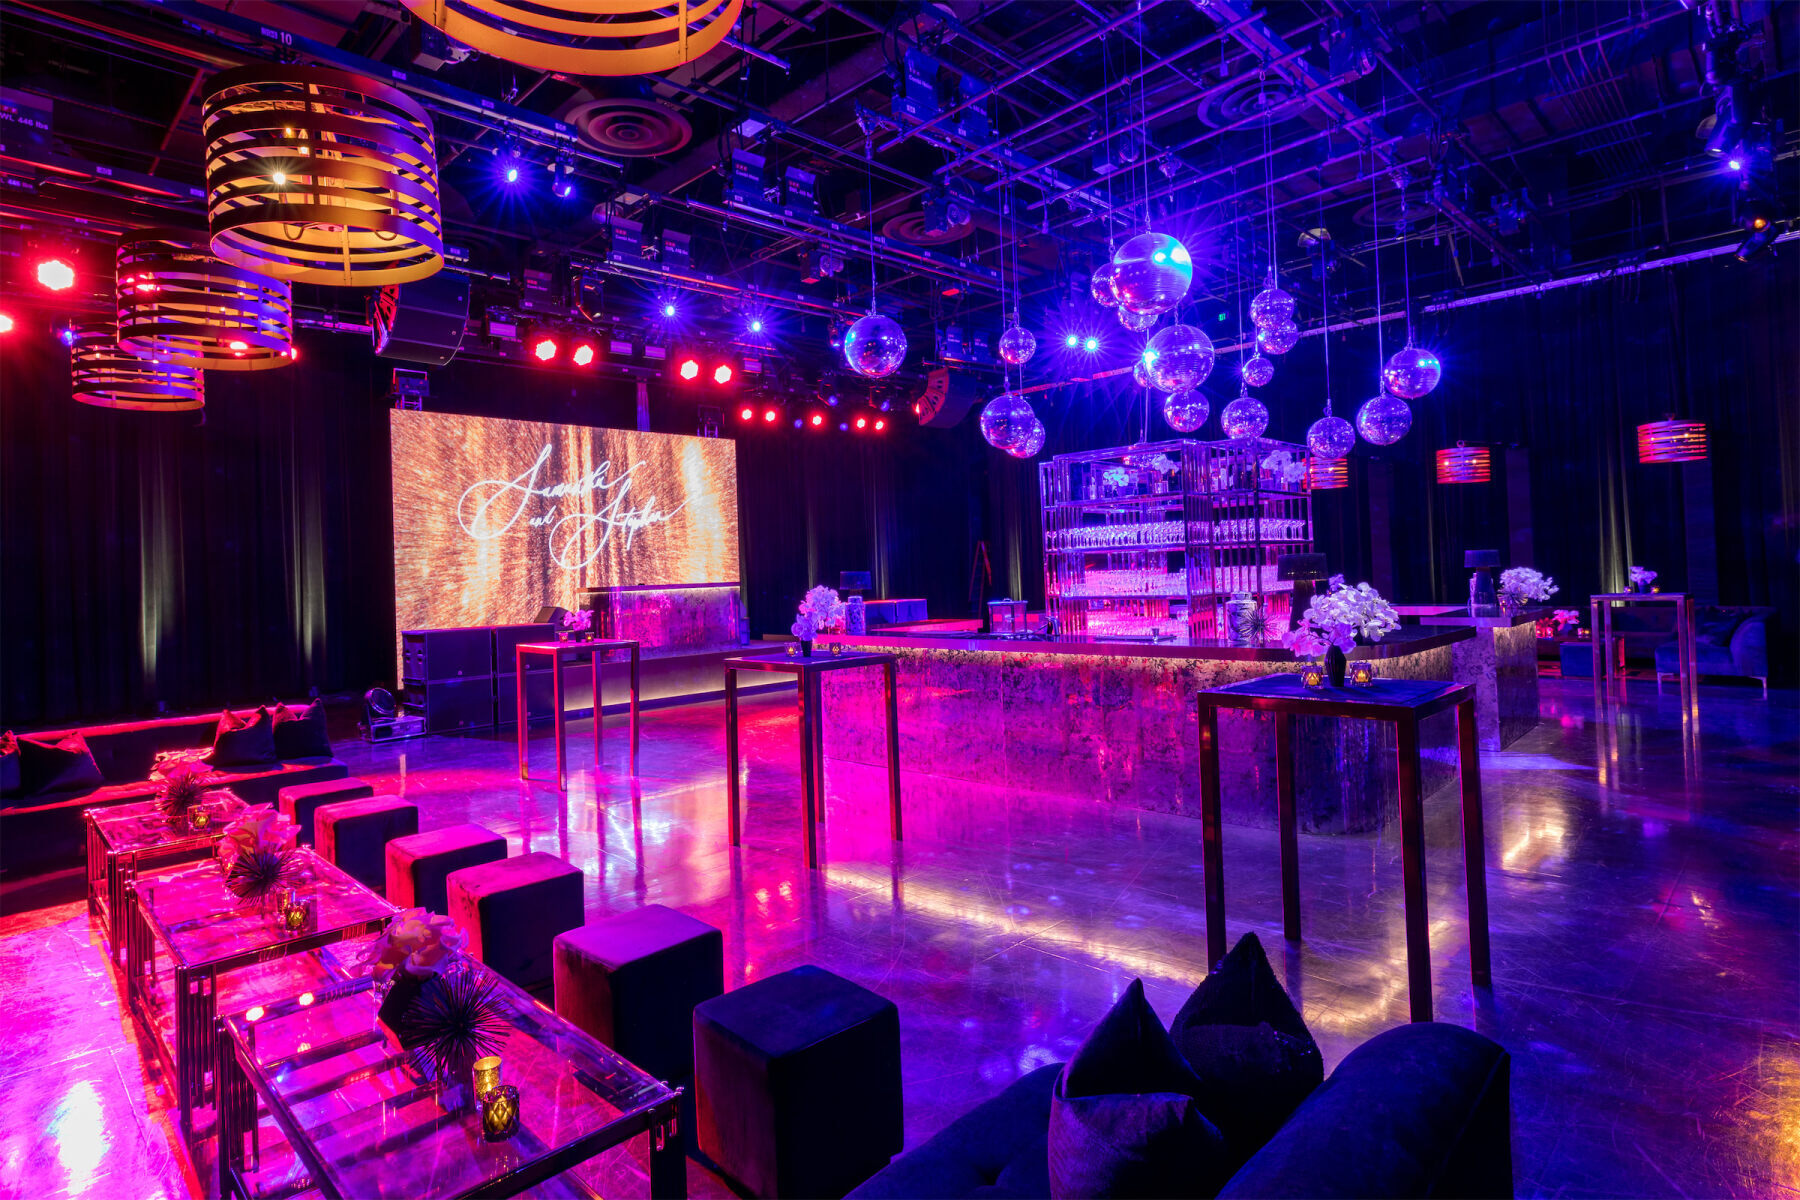 An after-party space in a hotel was transformed for a glam enchanted wedding with colored lighting, disco balls, and the couple's name displayed on a screen.